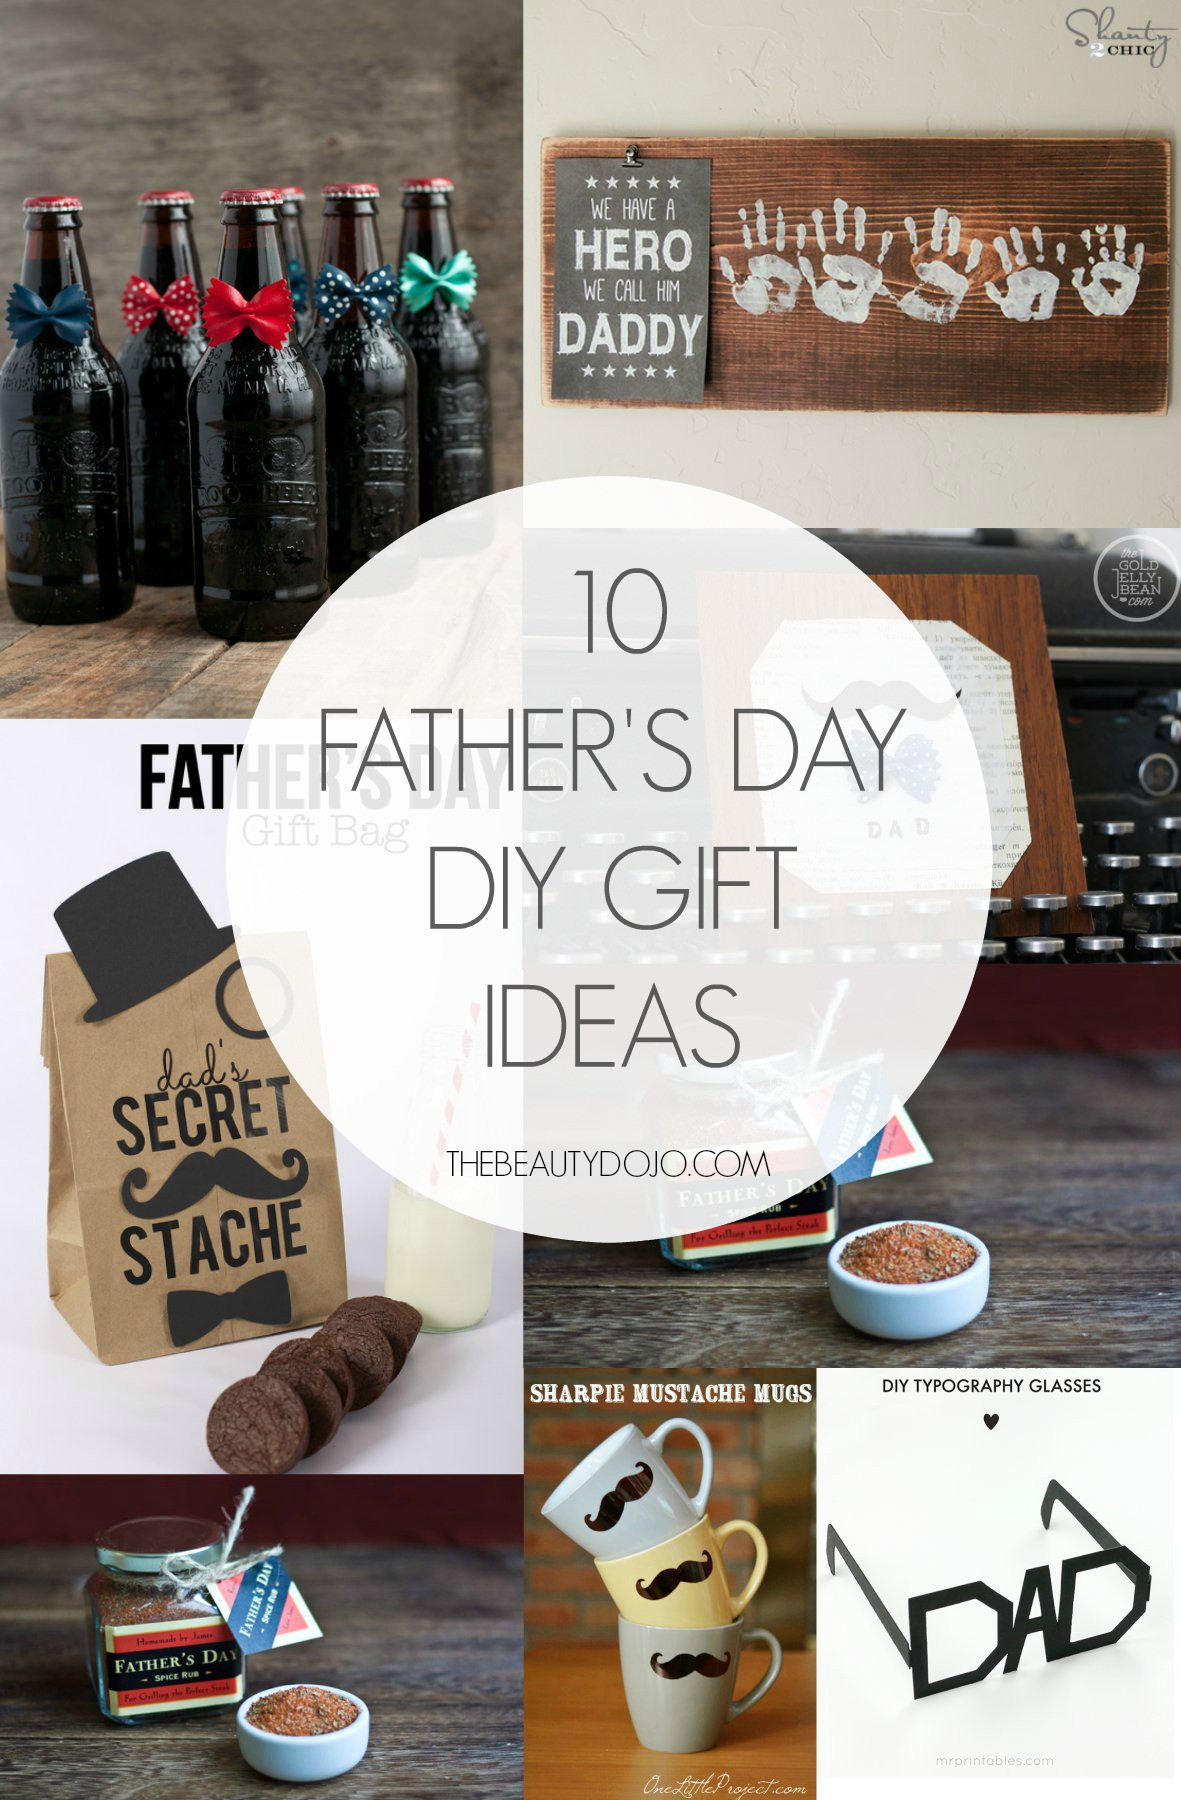 Diy Father Day Gift Ideas
 10 Father s Day DIY Gift Ideas The Beautydojo